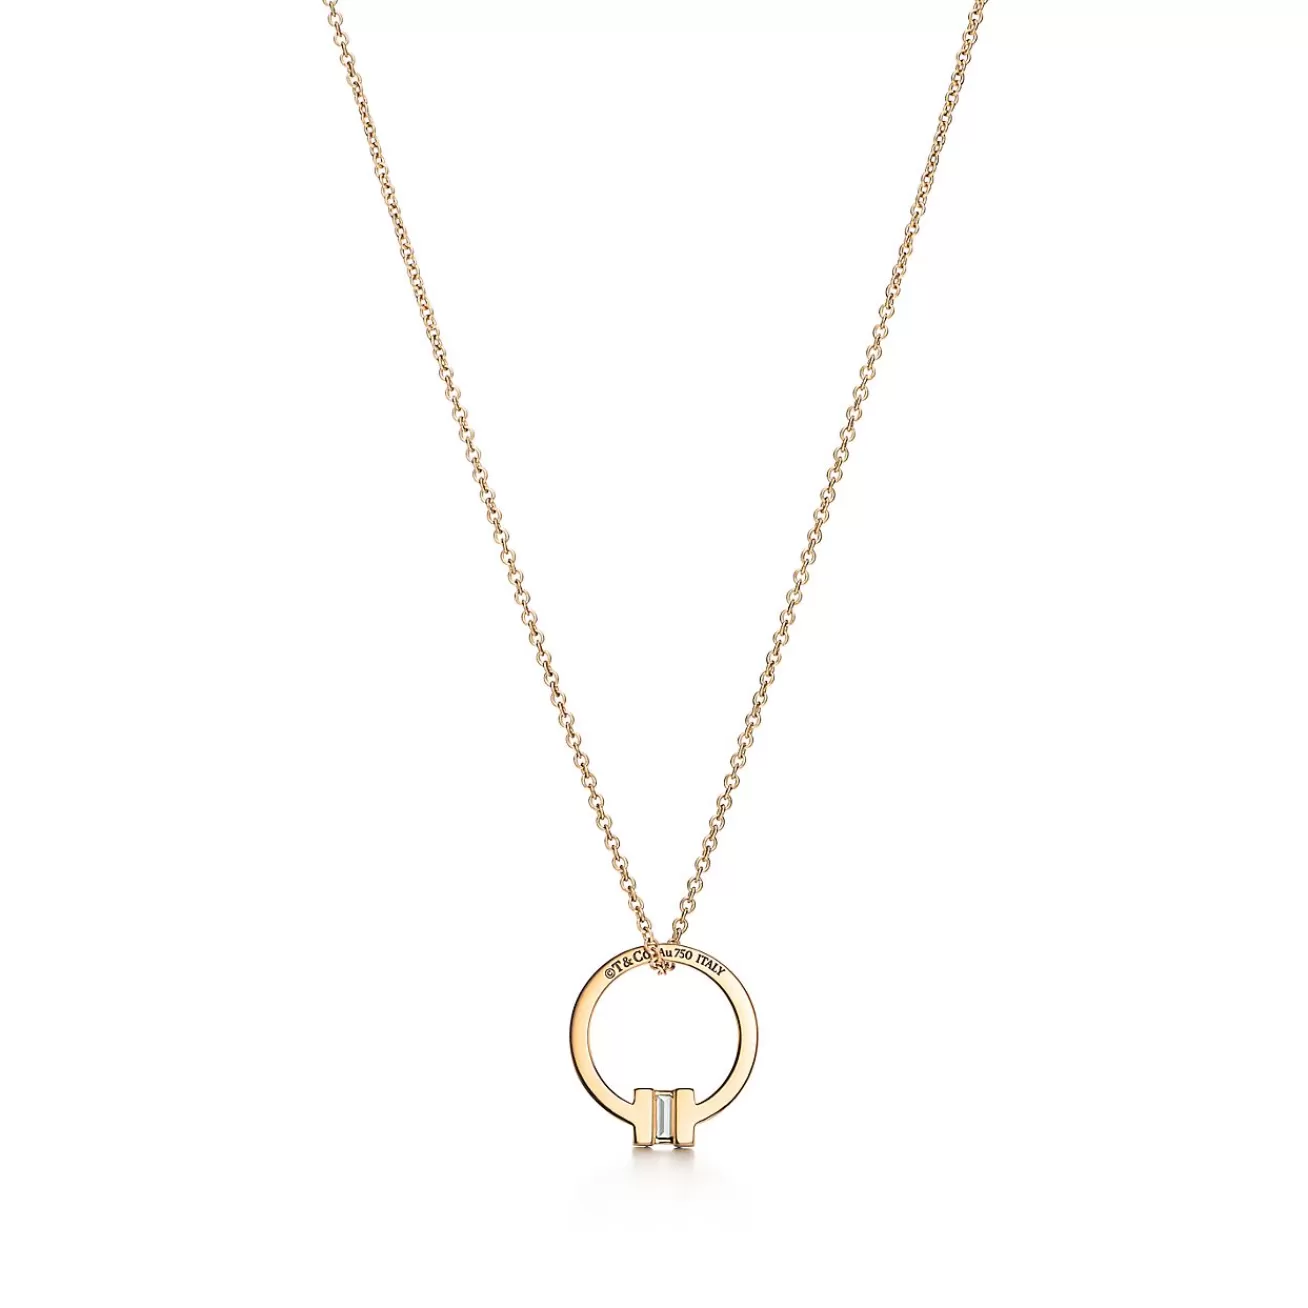 Tiffany & Co. Tiffany T pendant in 18k gold with a baguette diamond. | ^ Necklaces & Pendants | Men's Jewelry